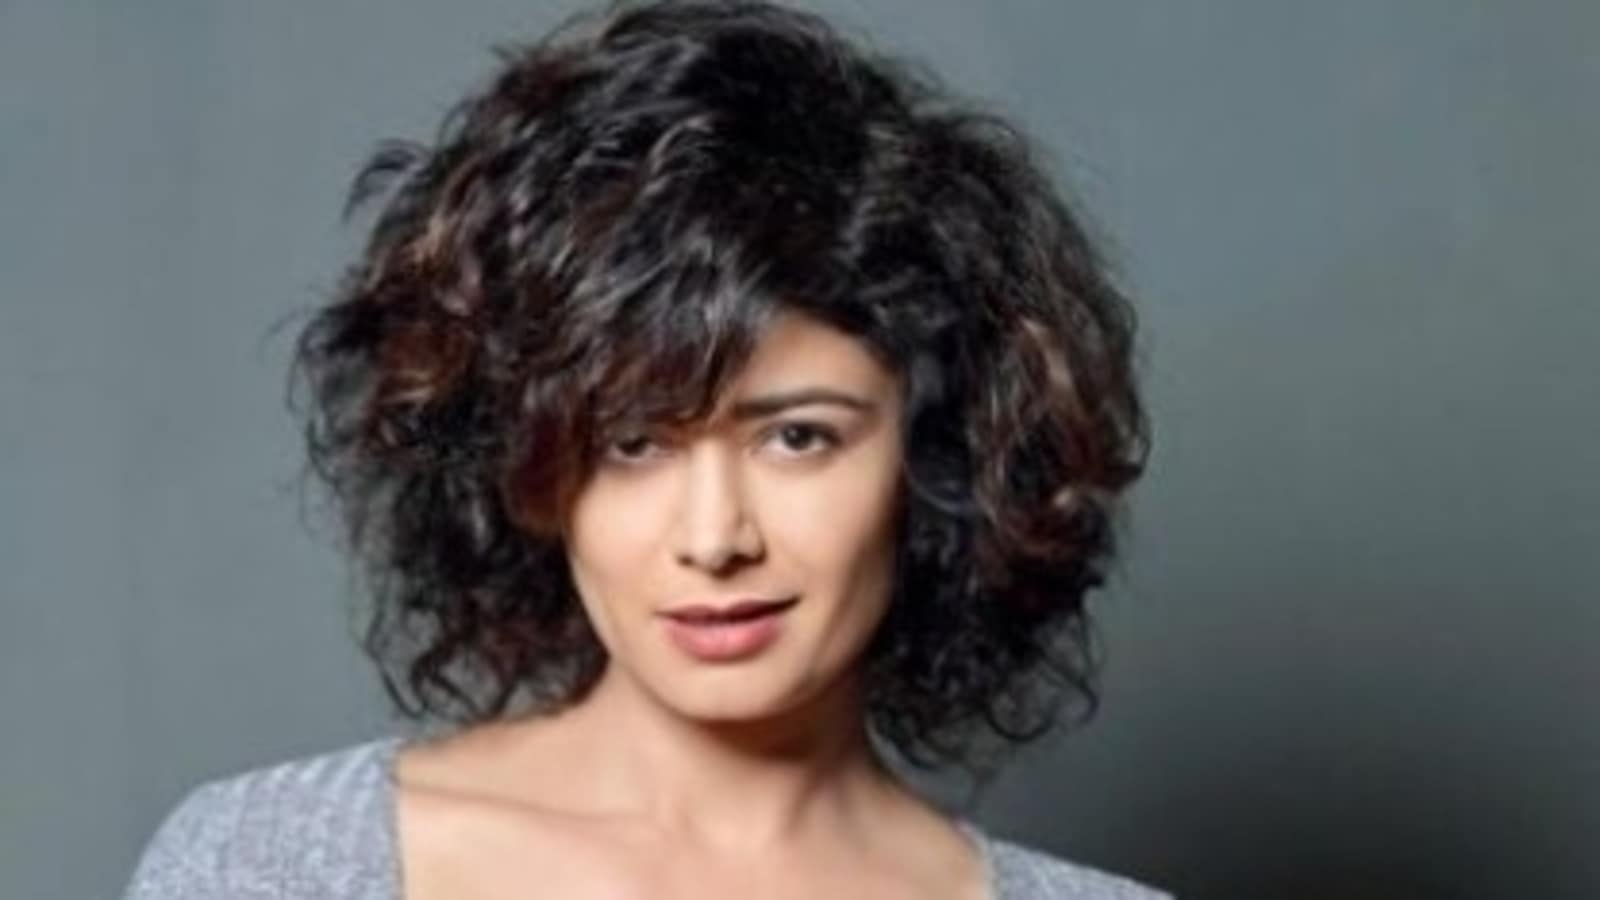 Pooja Batra’s headstand variation is how we want to start our day too